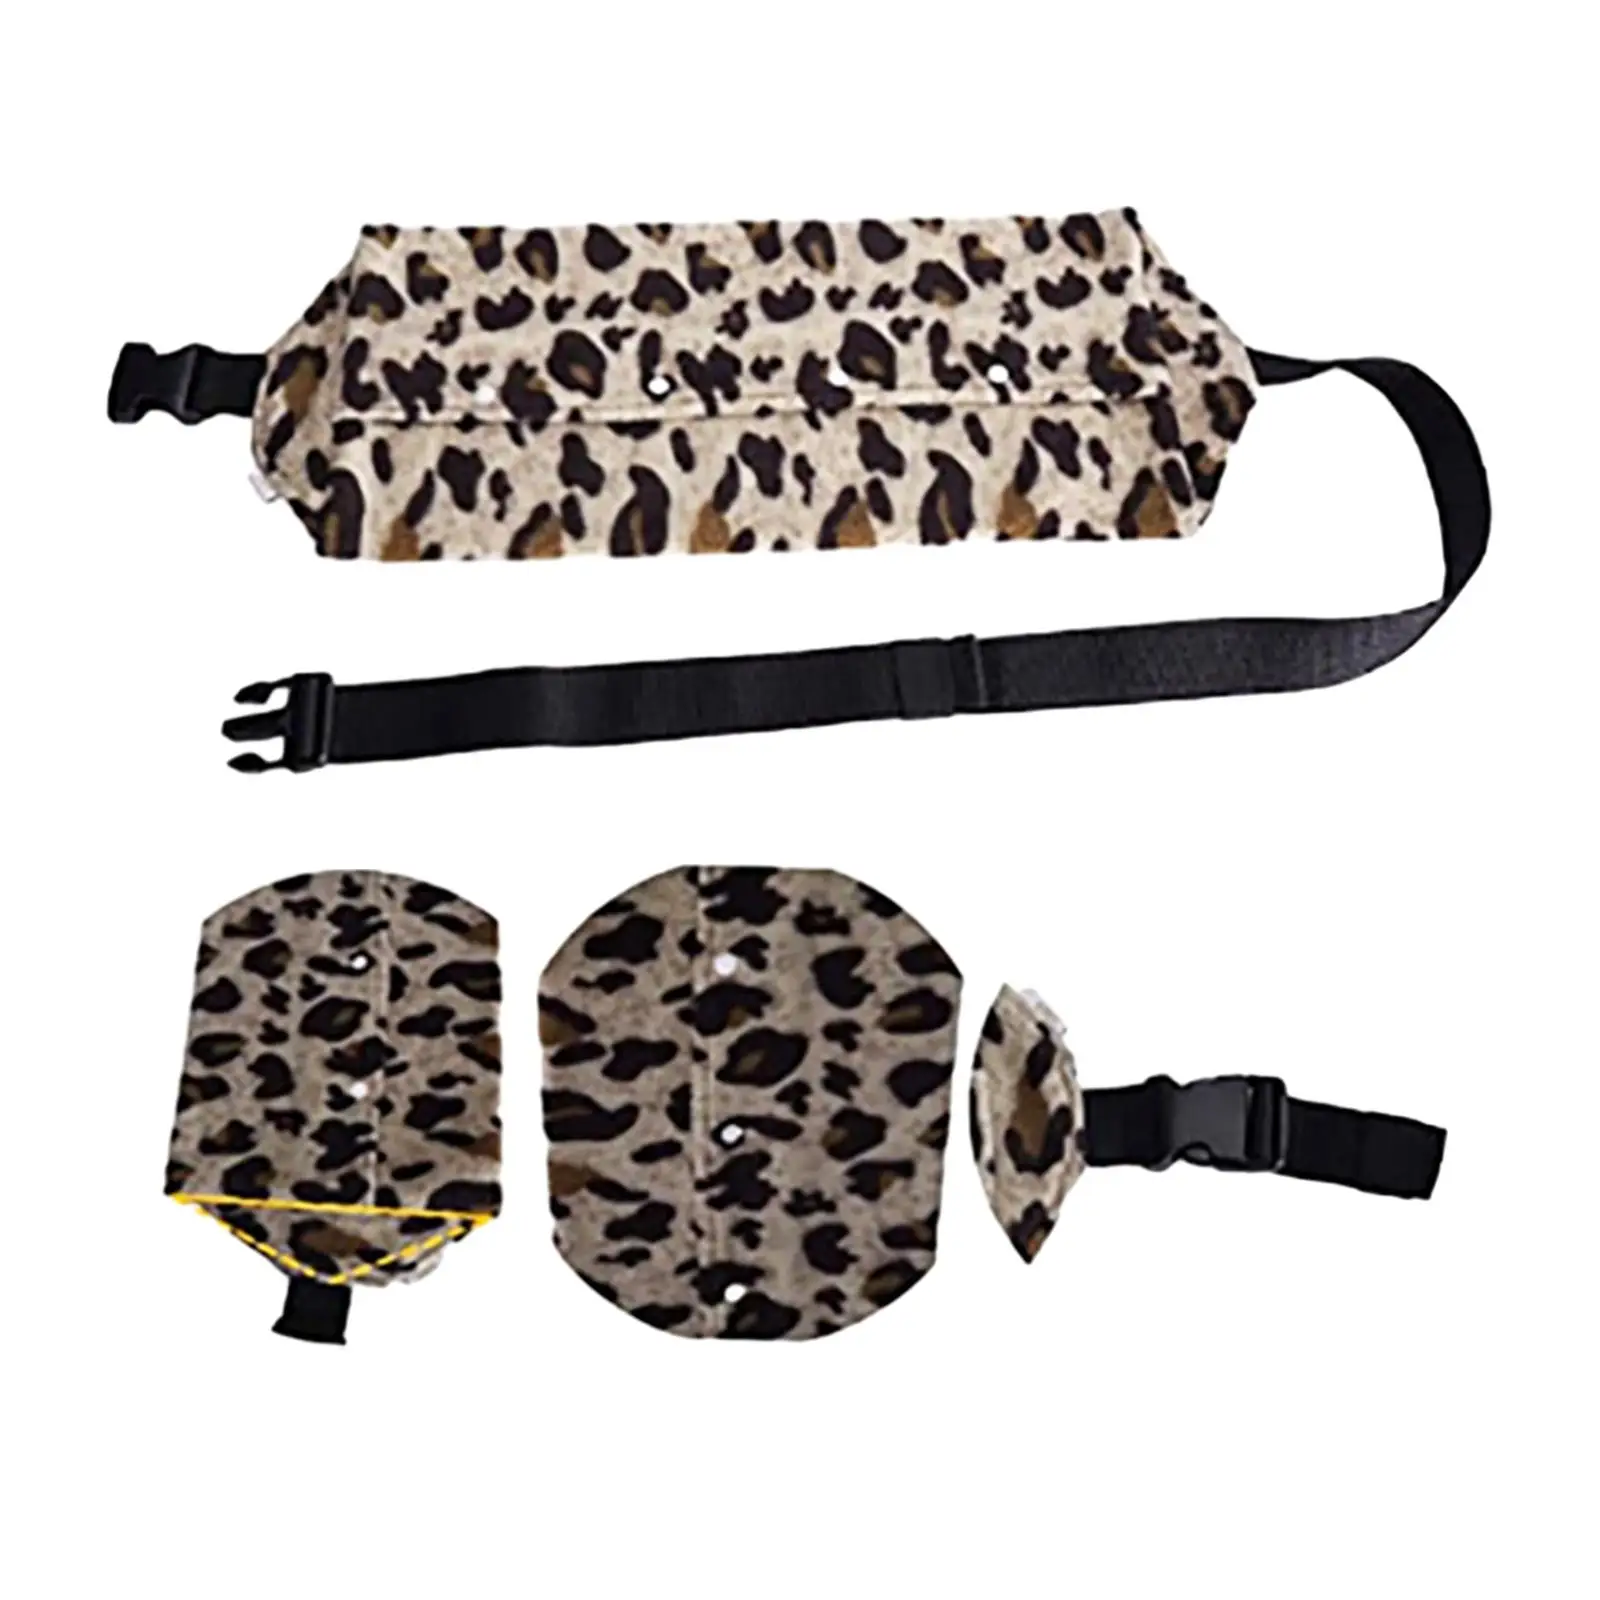 Small Animal Carrier Pouch Holder Avoid Falling or Slipping with Adjustable Strap Hand Free Small Pet Bag for Travel Small Pets